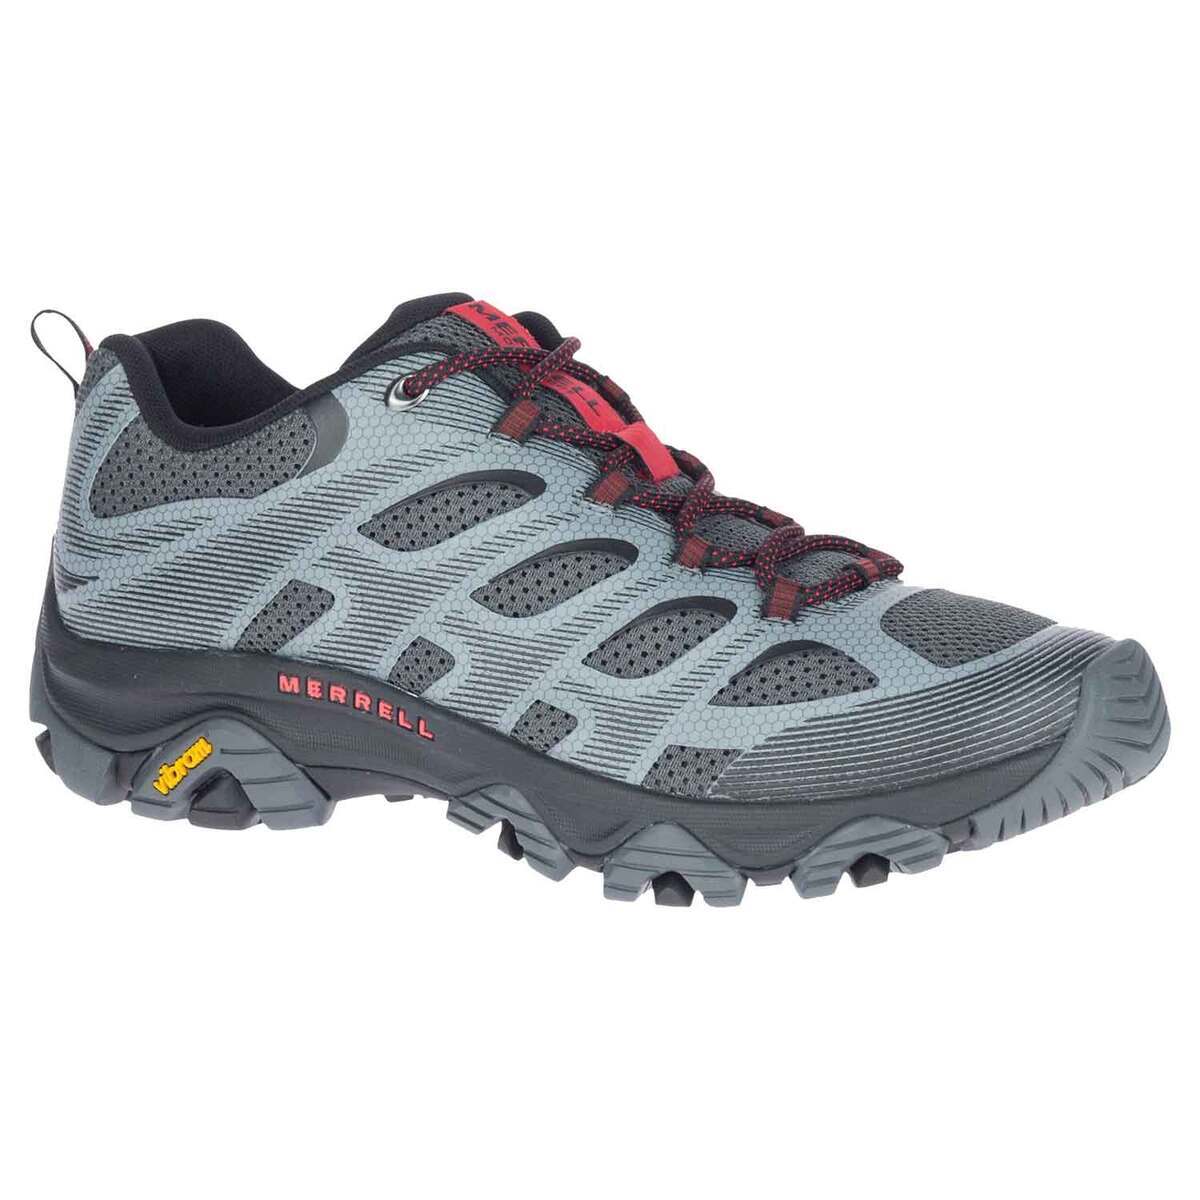 30% Off Select Merrell Styles